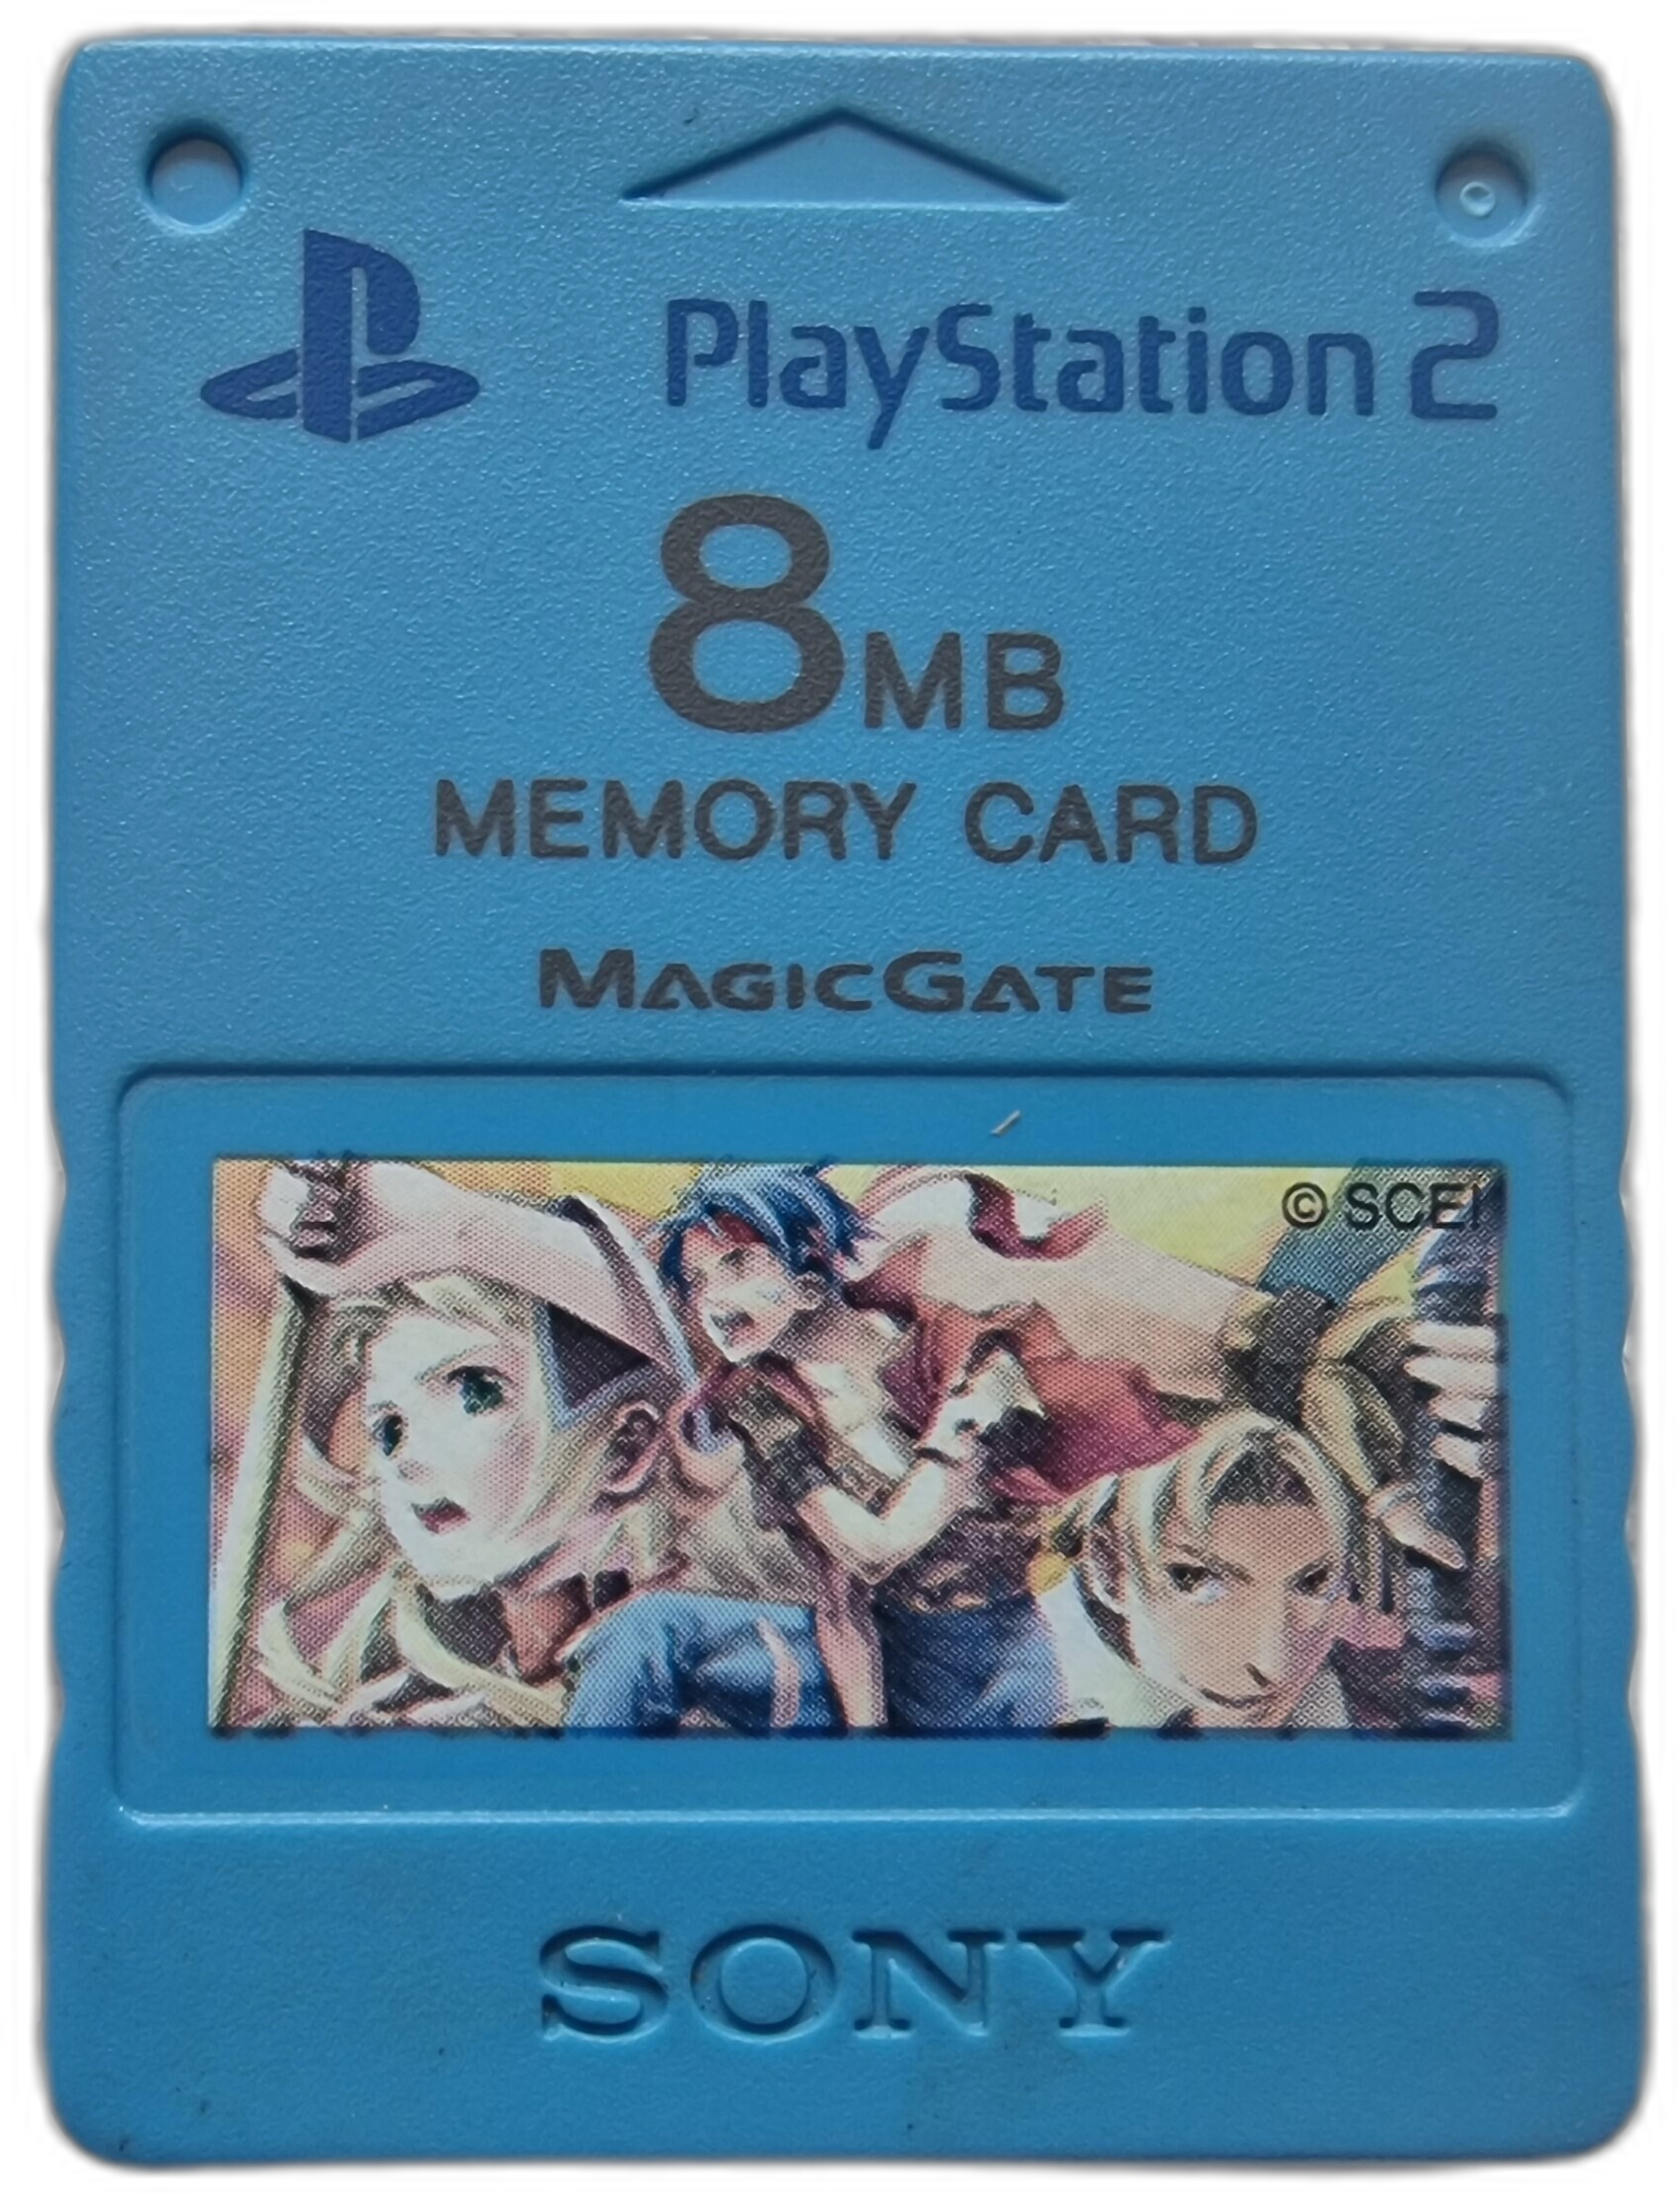  Sony PlayStation 2 Wild Arms Alter Code F 8mb Memory Card